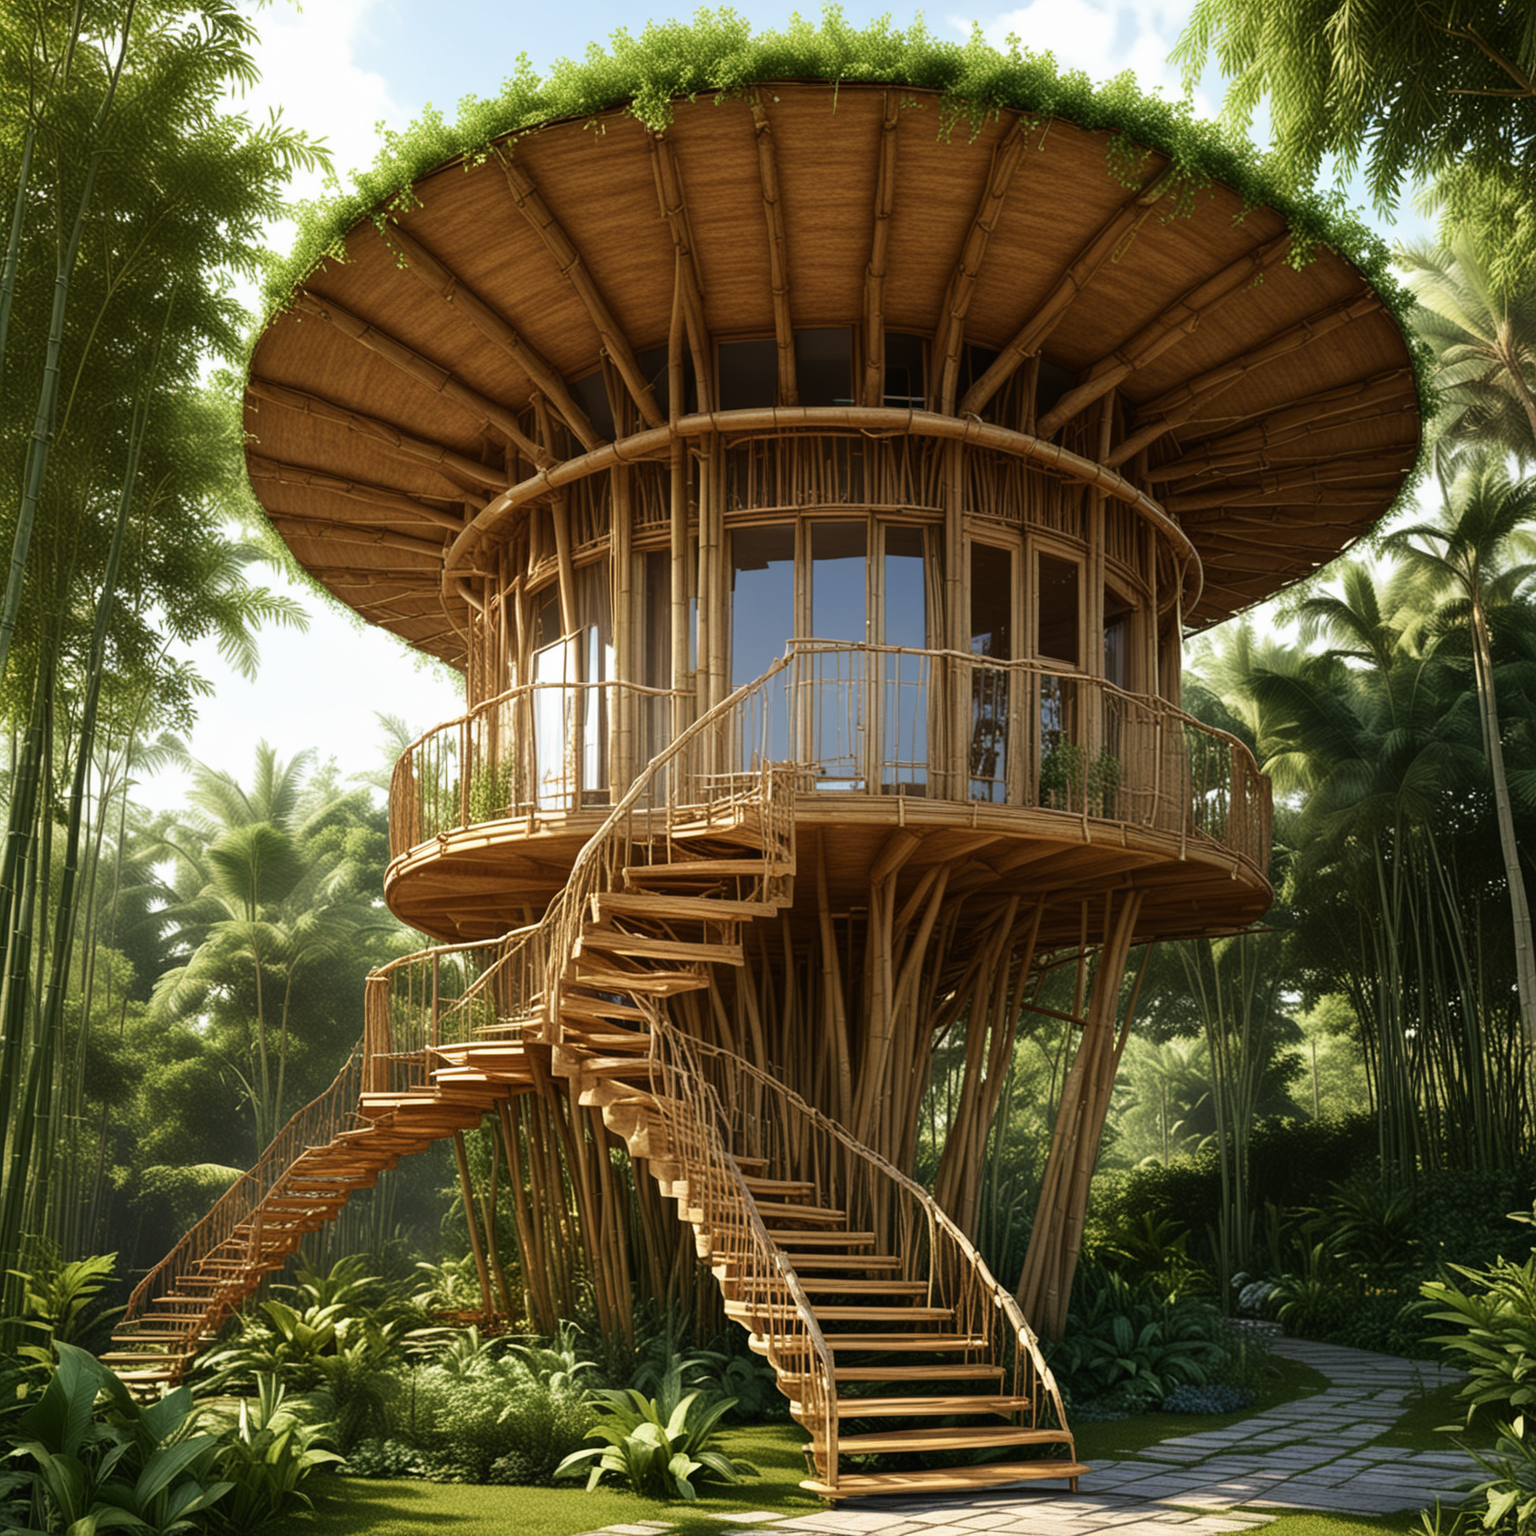 a small house made out of bamboo, elevated 25 feet high. It should have only three levels: the bottom level should be open without walls or windows, the second level will be open and should have a lounge area, the third and last level will have windows around.  hyperbolic tower made out of bamboo poles. The roof and walls  should have a contemporary architecture that has an organic and curved design .The stairs leading up to the villa should be inside the hyperbolic tower 